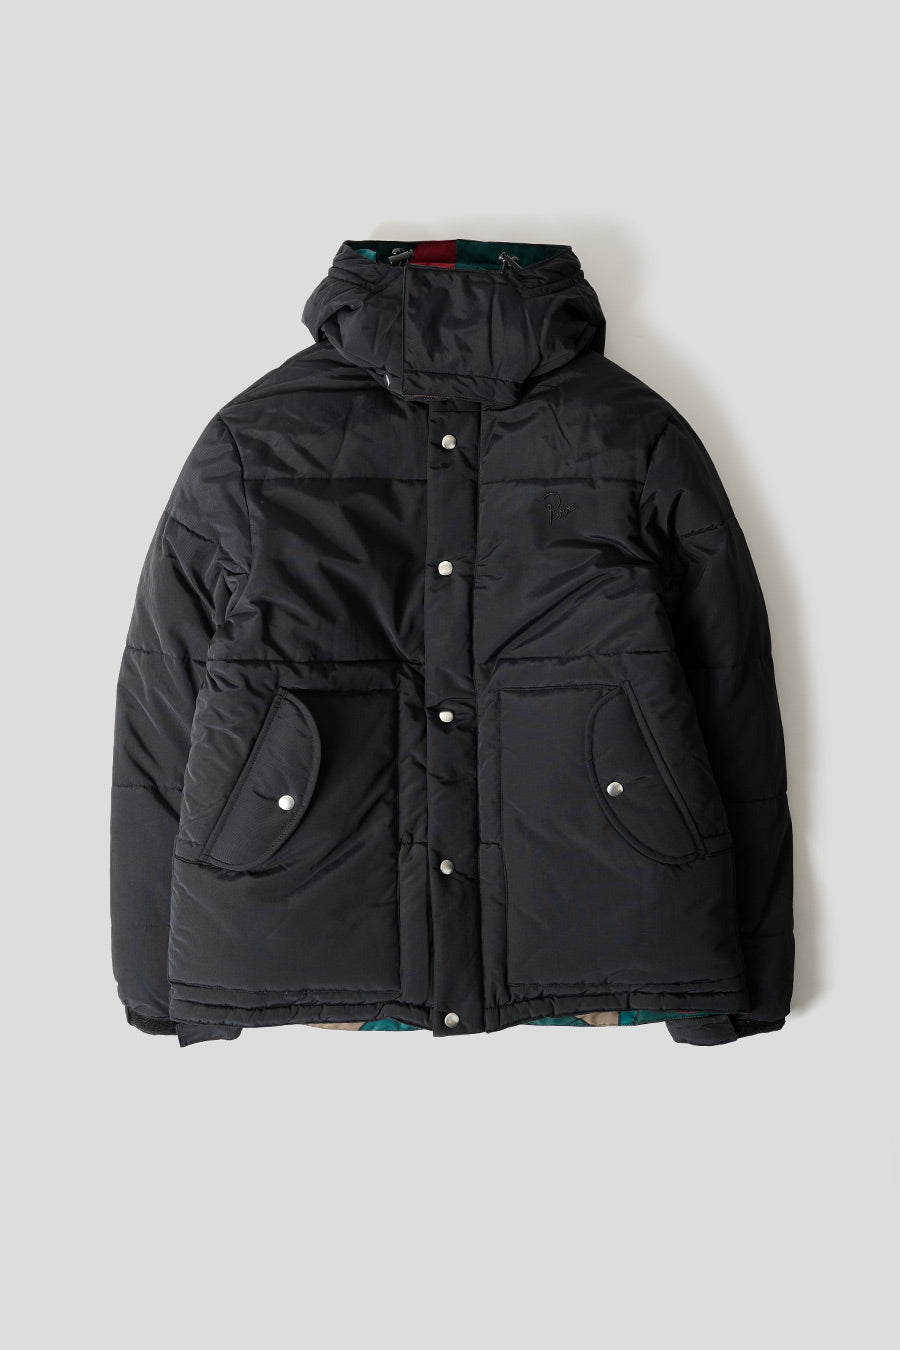 BY PARRA - BLACK QUILTED HOODIE - LE LABO STORE